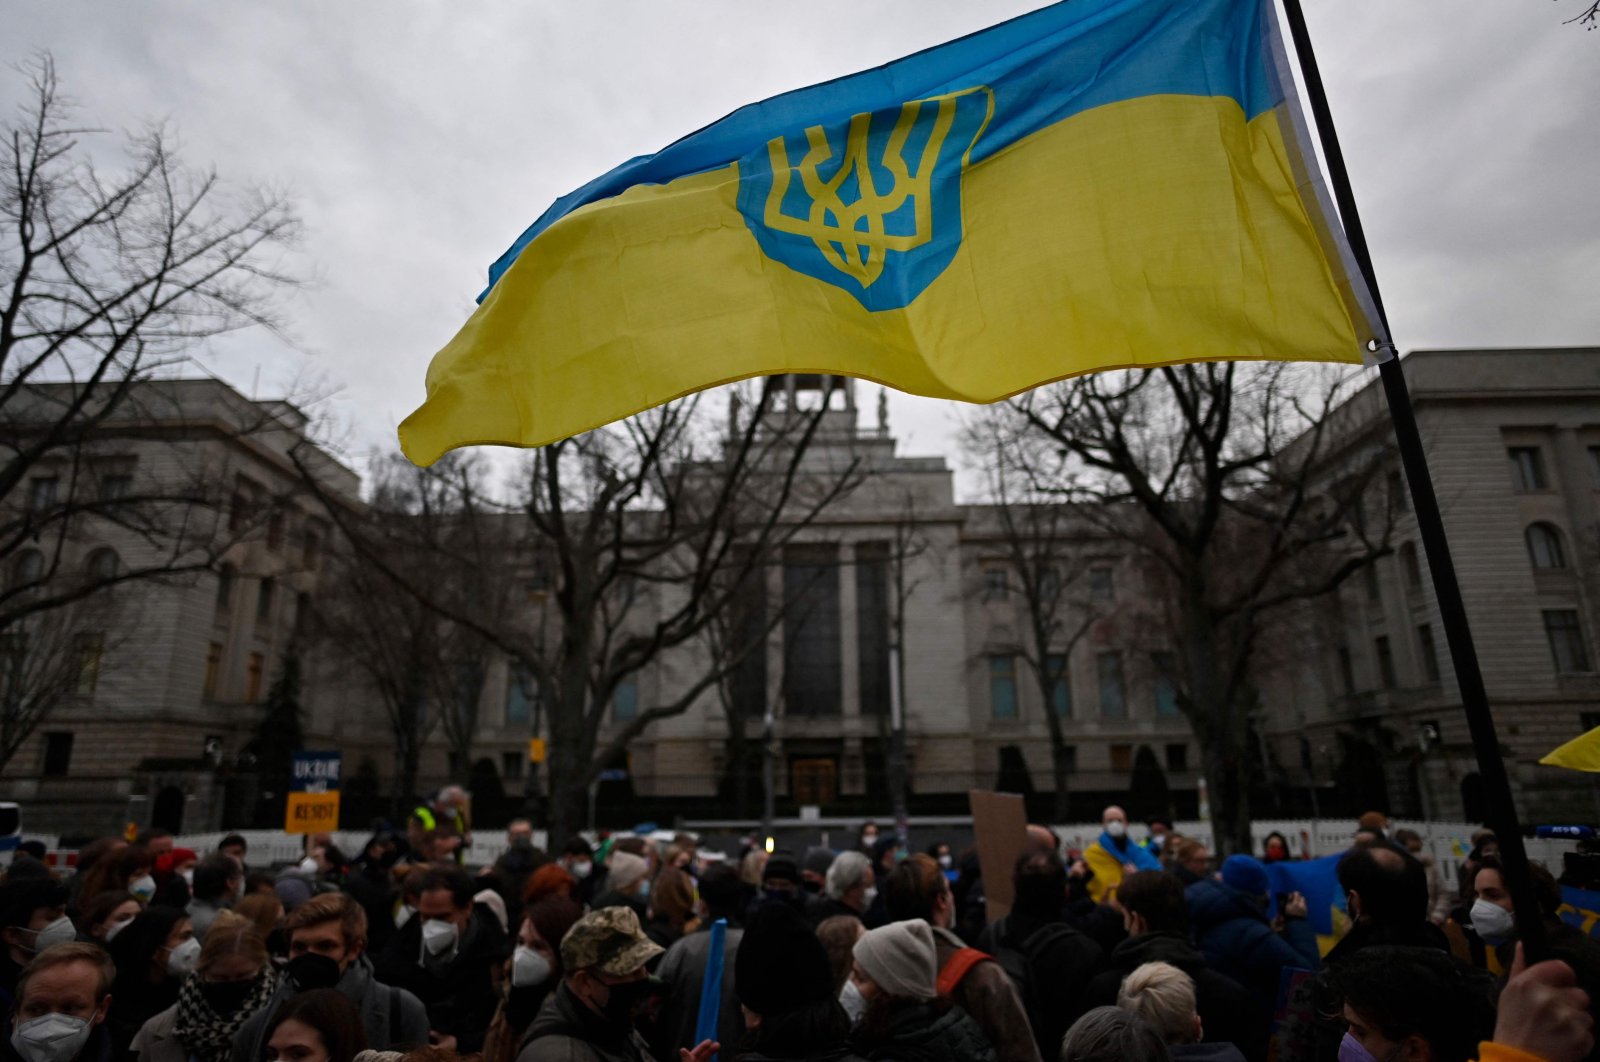 Pro-Ukraine demonstrators hold flags and placards during a demonstration in front of the Russian Embassy in Berlin, Feb. 22, 2022. (AFP Photo)